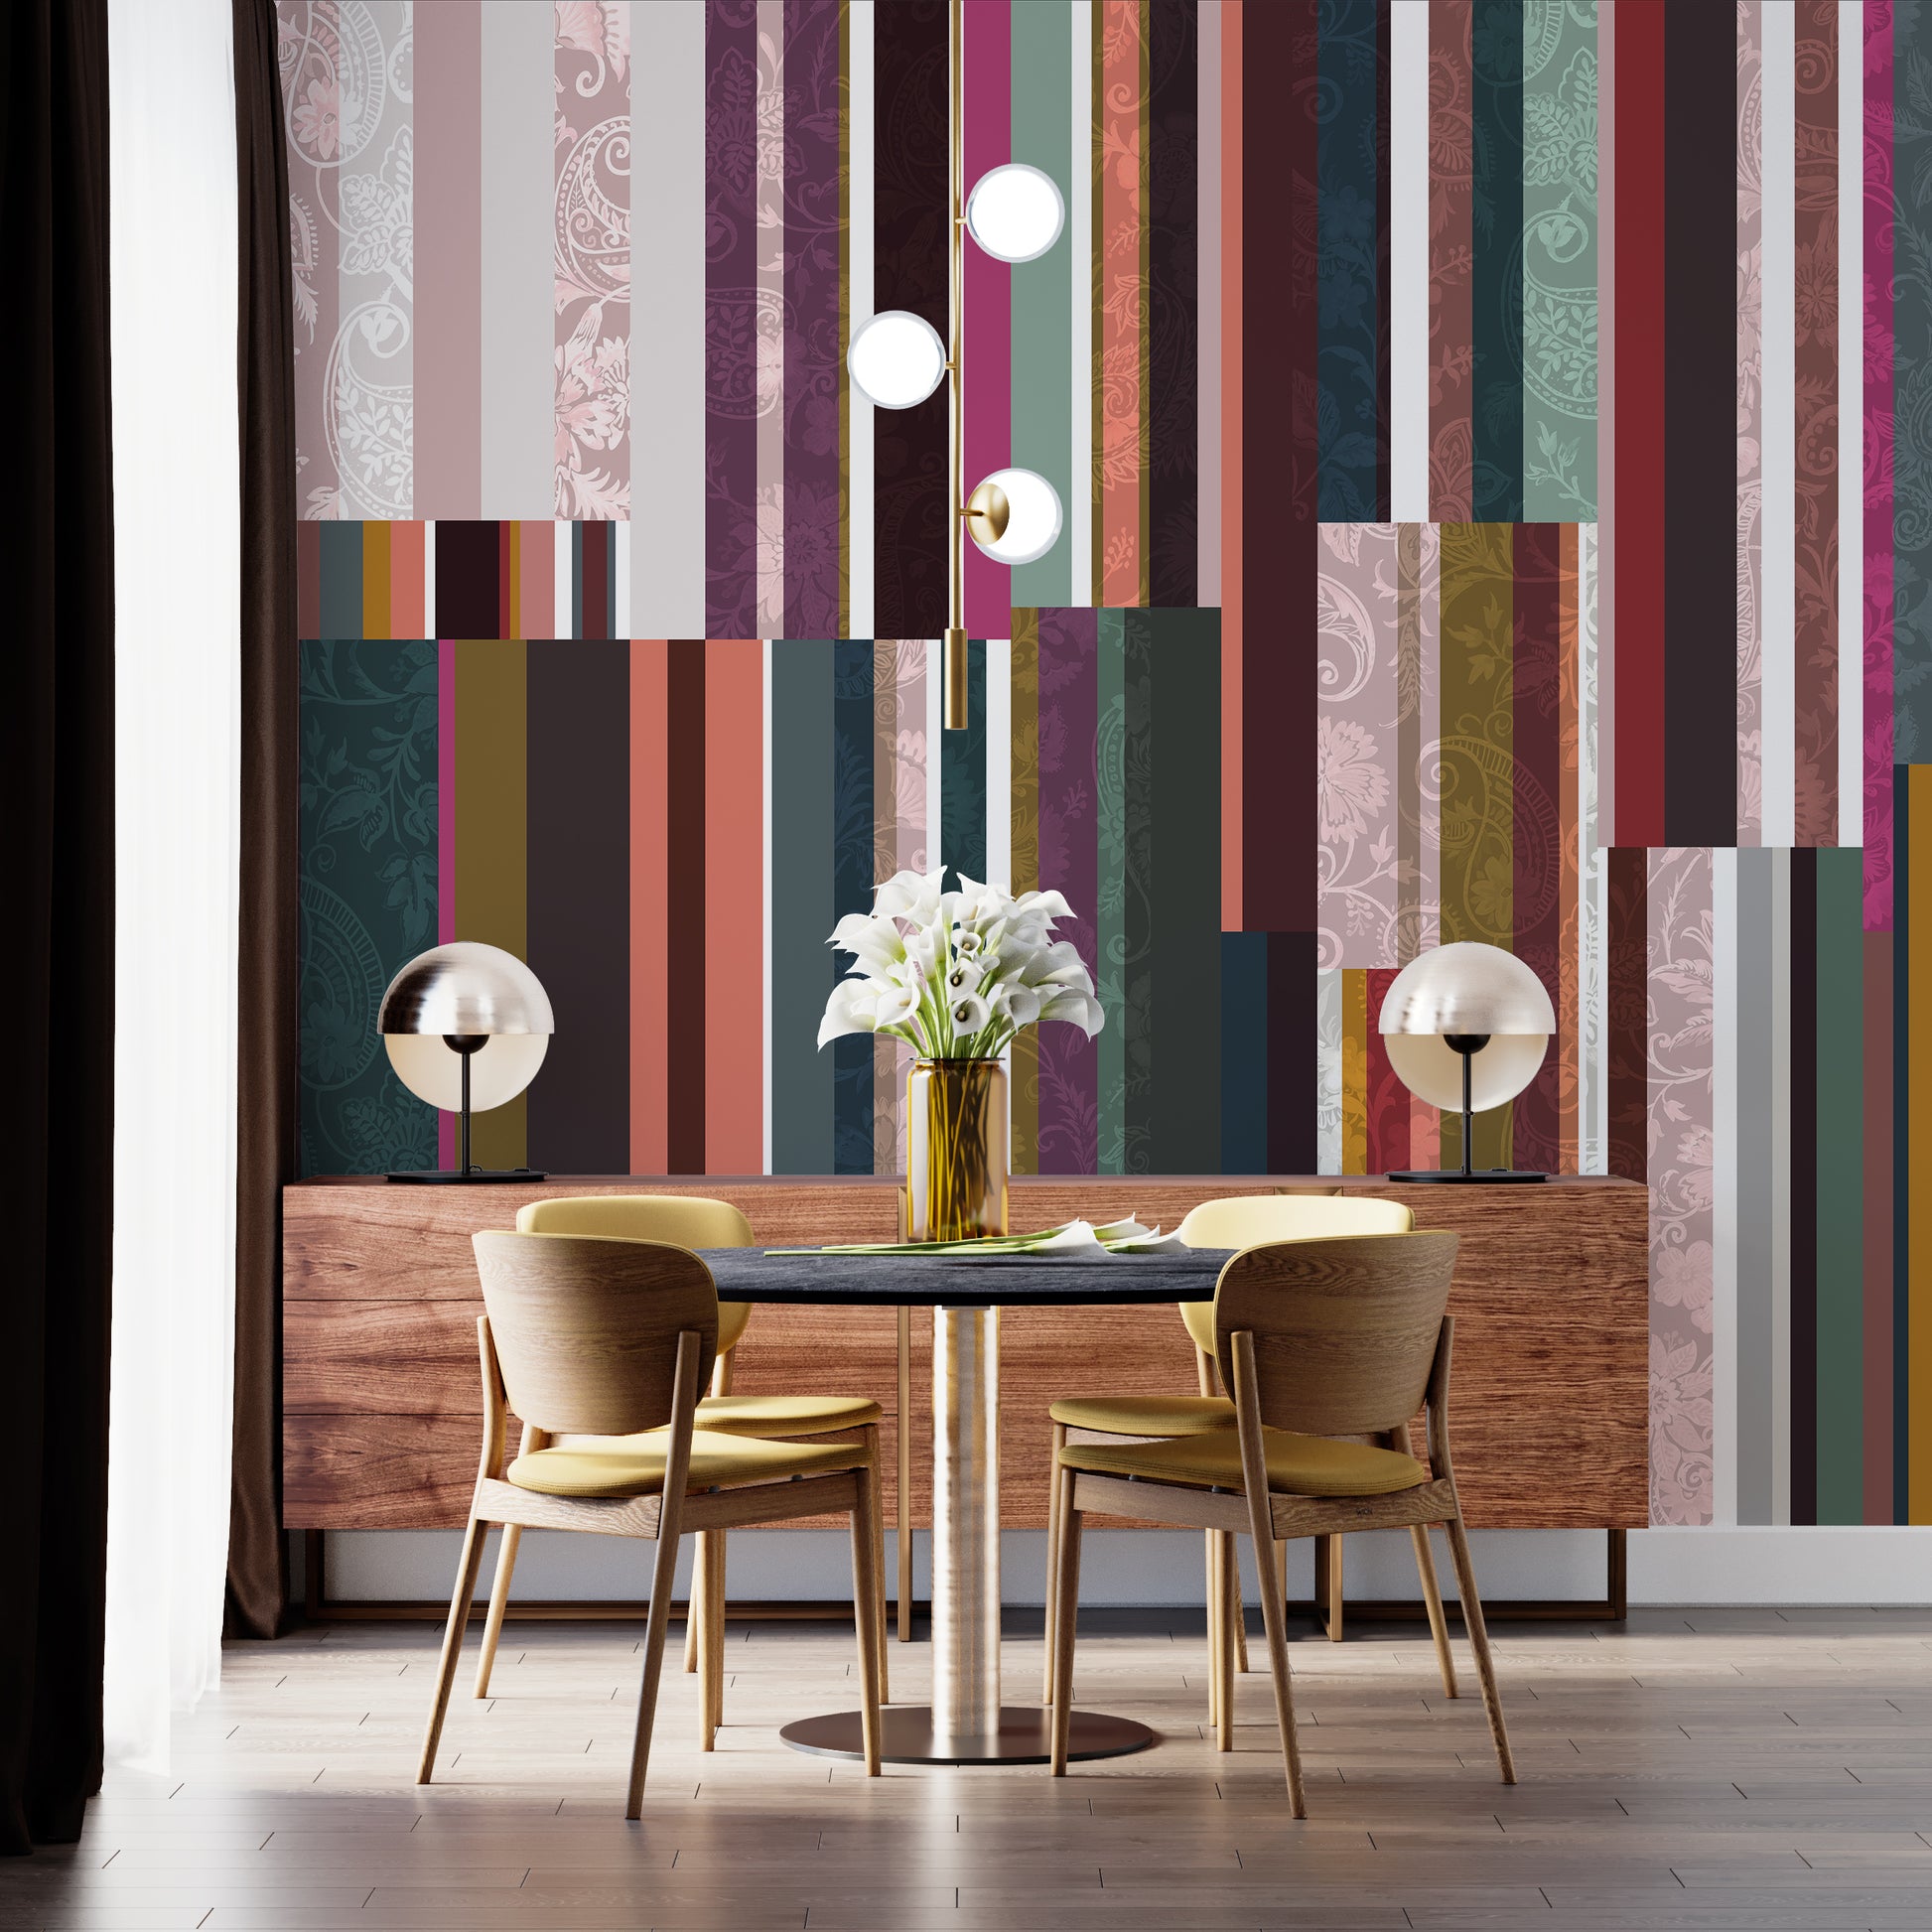 Melli Mello Got me staring photowall wallpaper bombastic colorful bold deco eyecatcher be different living room deco 